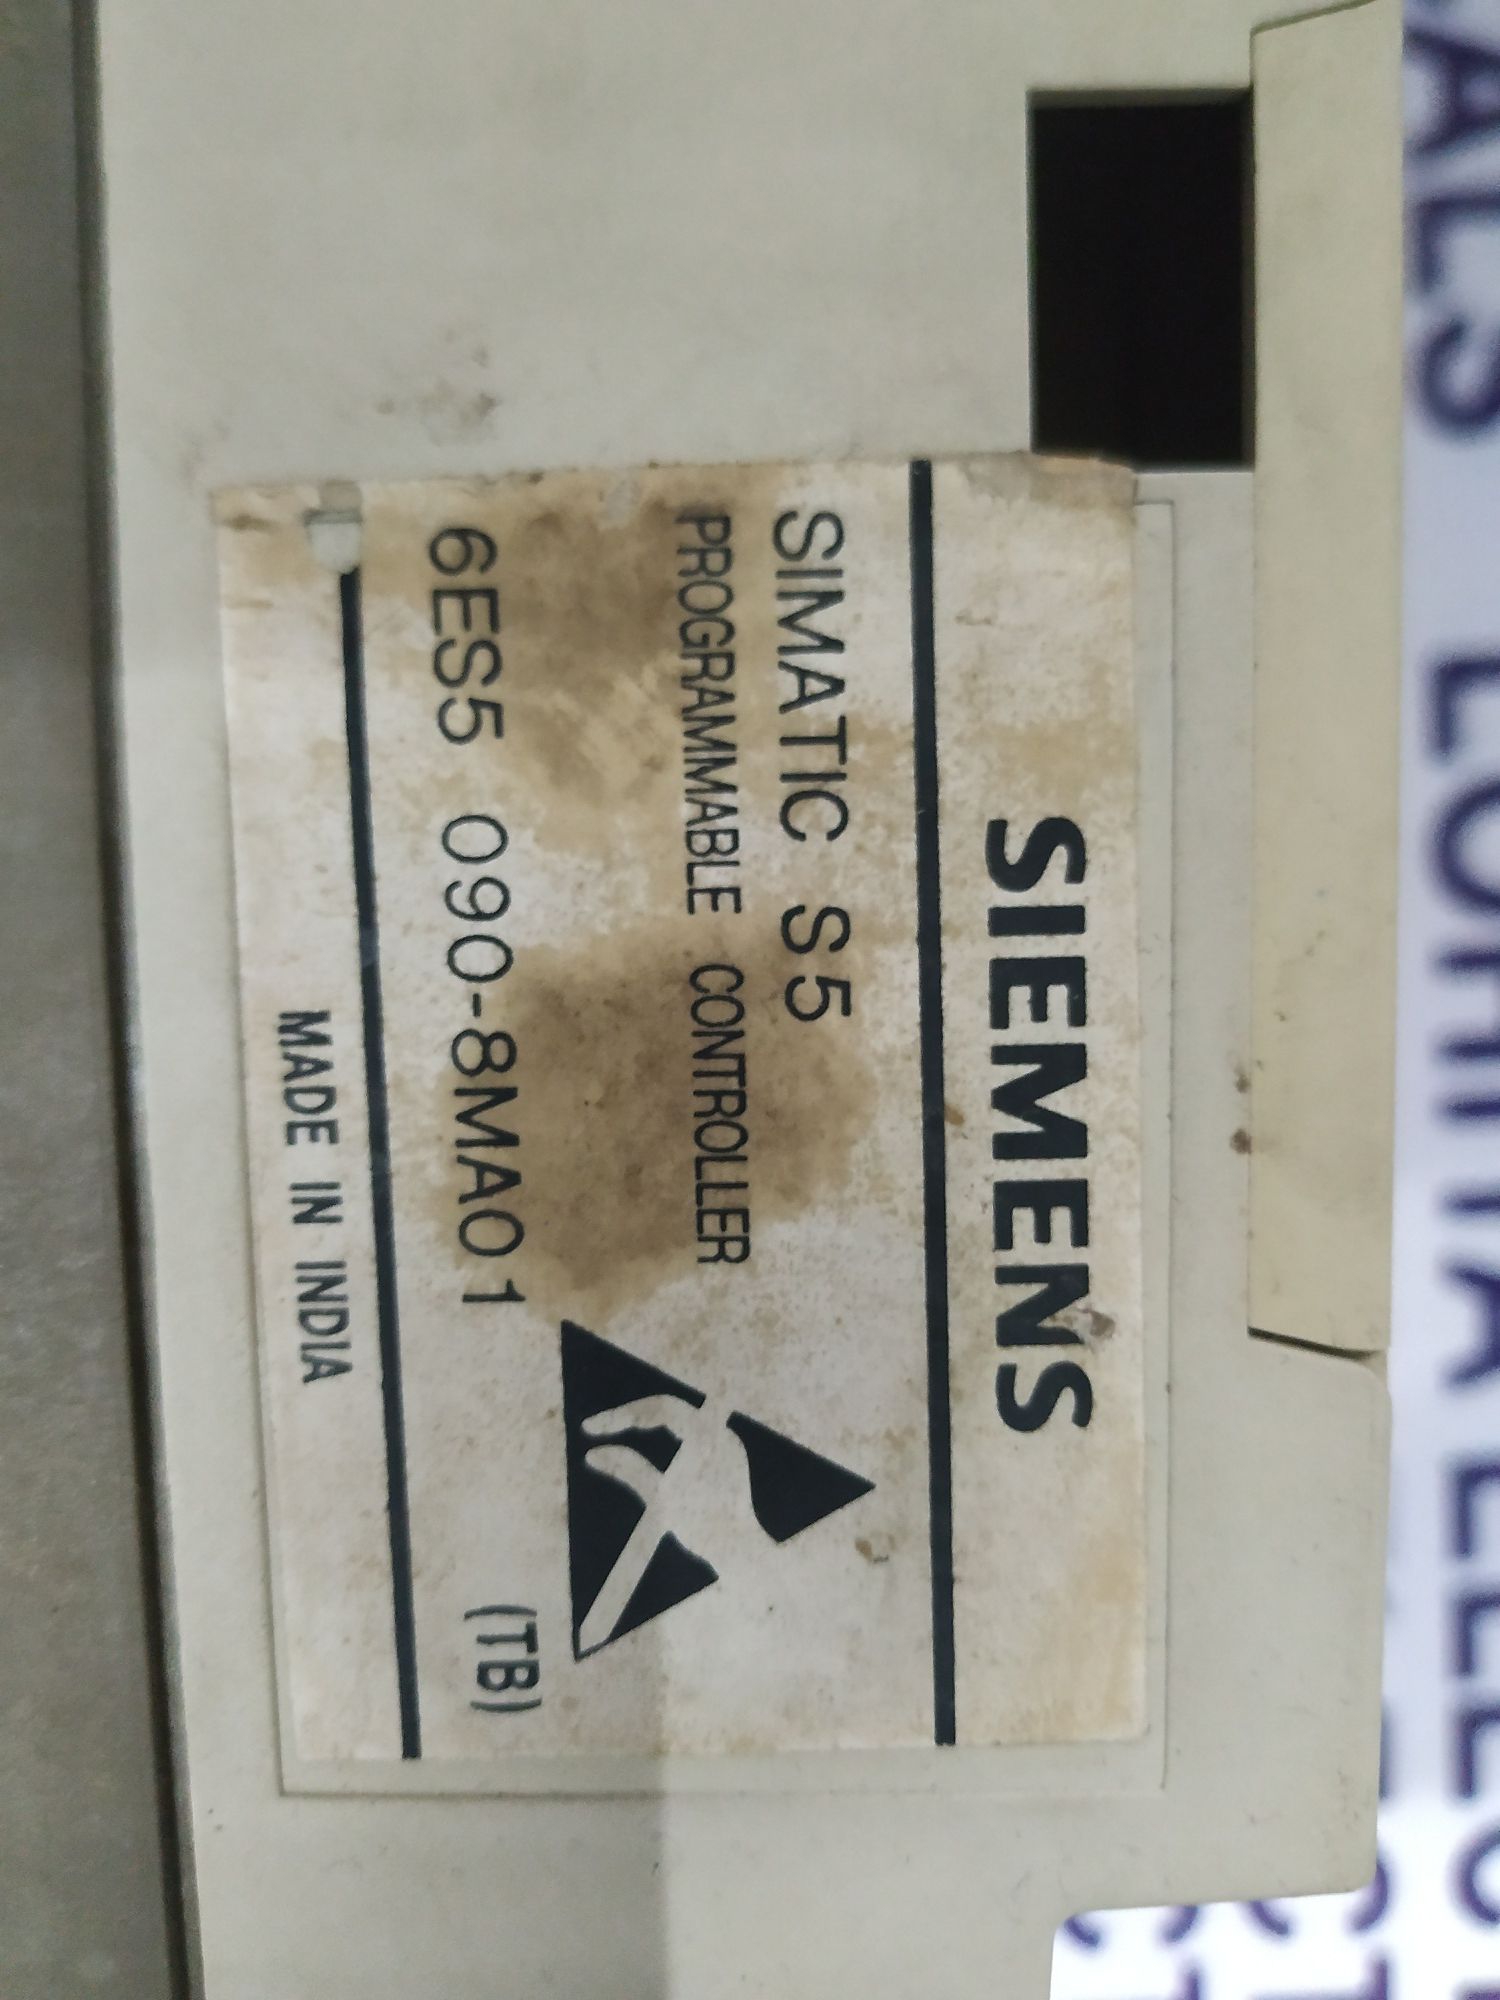 SIEMENS SIMATIC S5 PROGRAMMABLE CONTROLLER 6ES5 090-8MA01